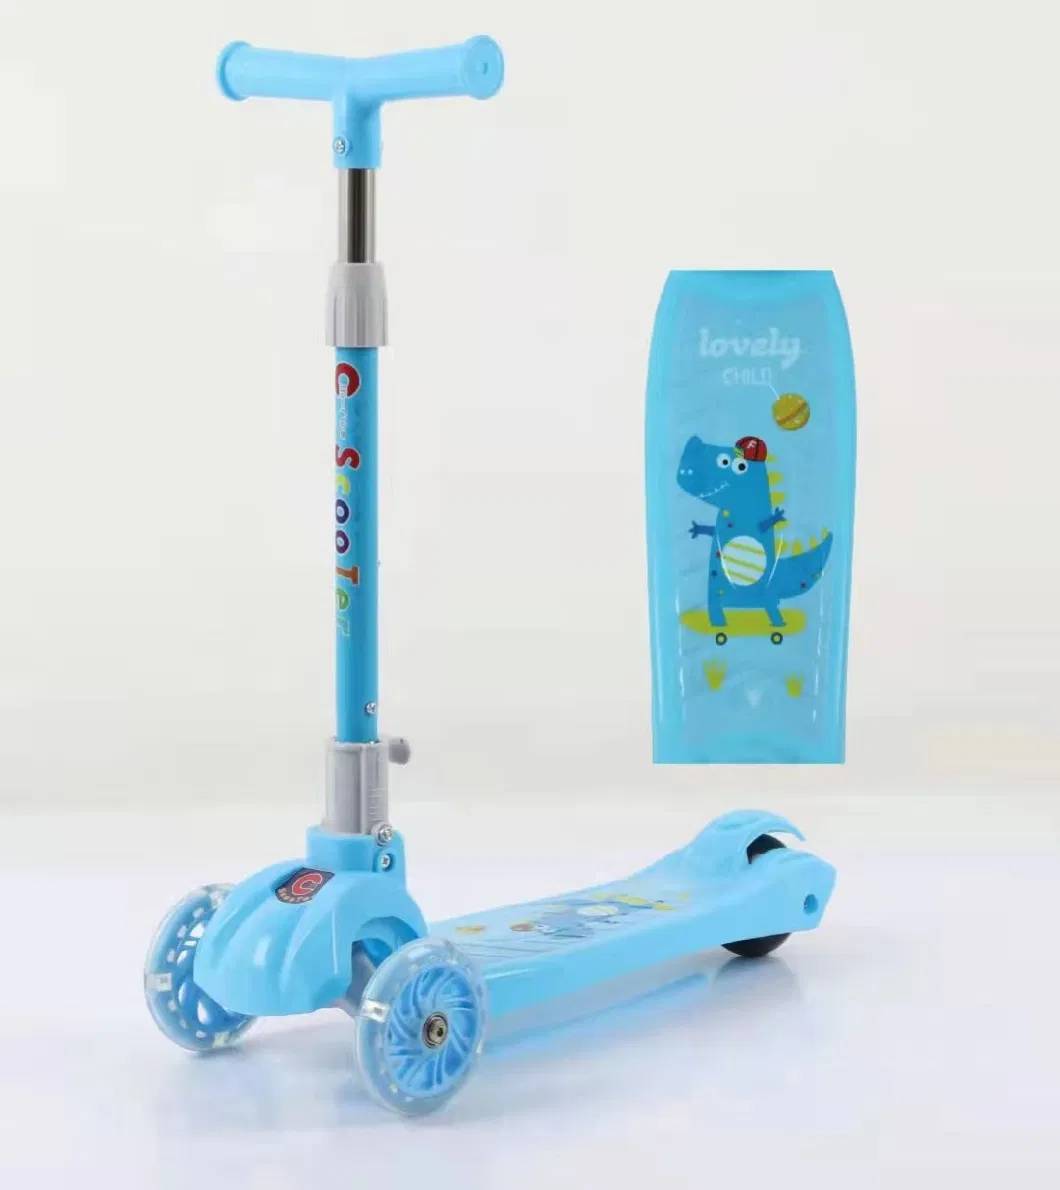 China Supplier Cheap Boys Girls Cool Kids Scooter Foldable Outdoor Baby Toy Kick Scooter